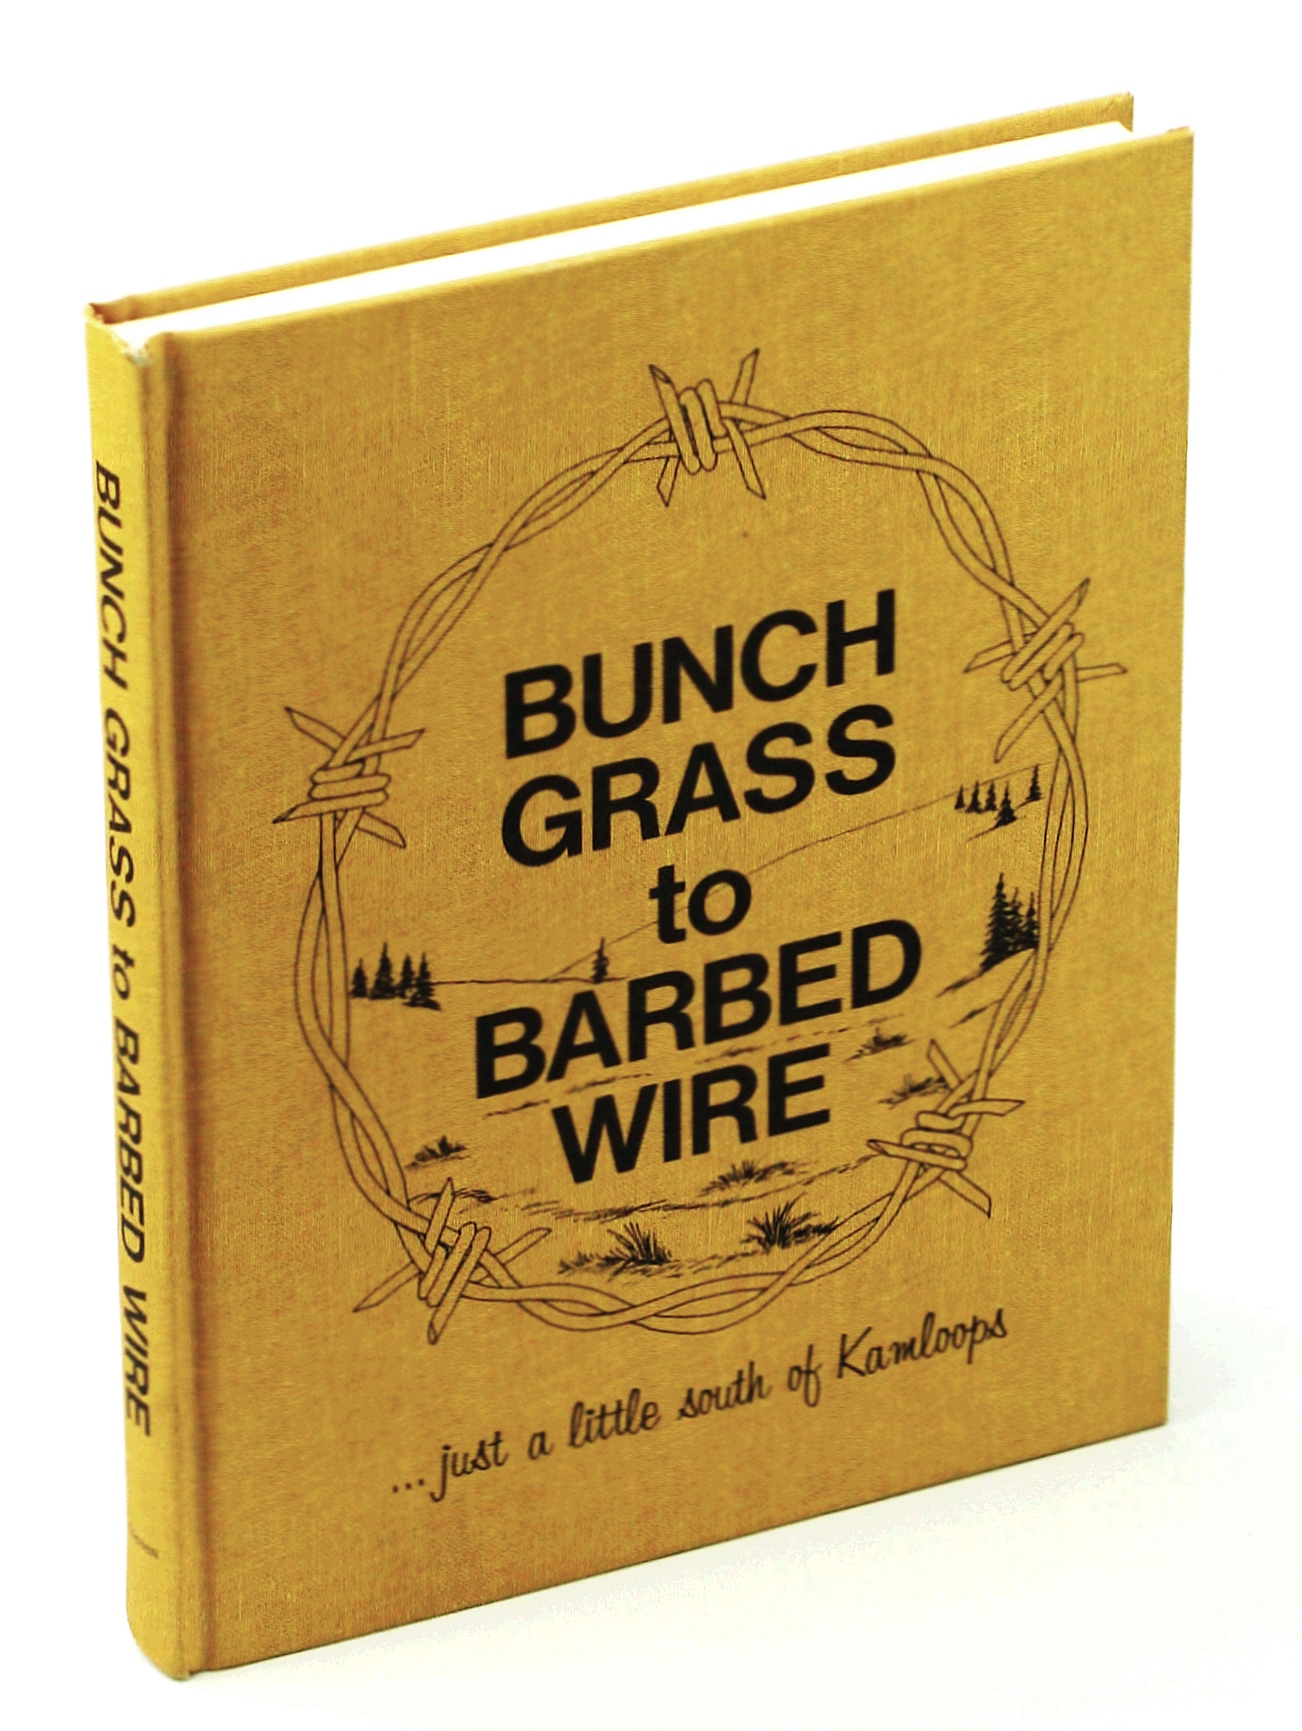 Image for Bunch Grass to Barbed Wire... Just a Little South of Kamloops [British Columbia Local History]